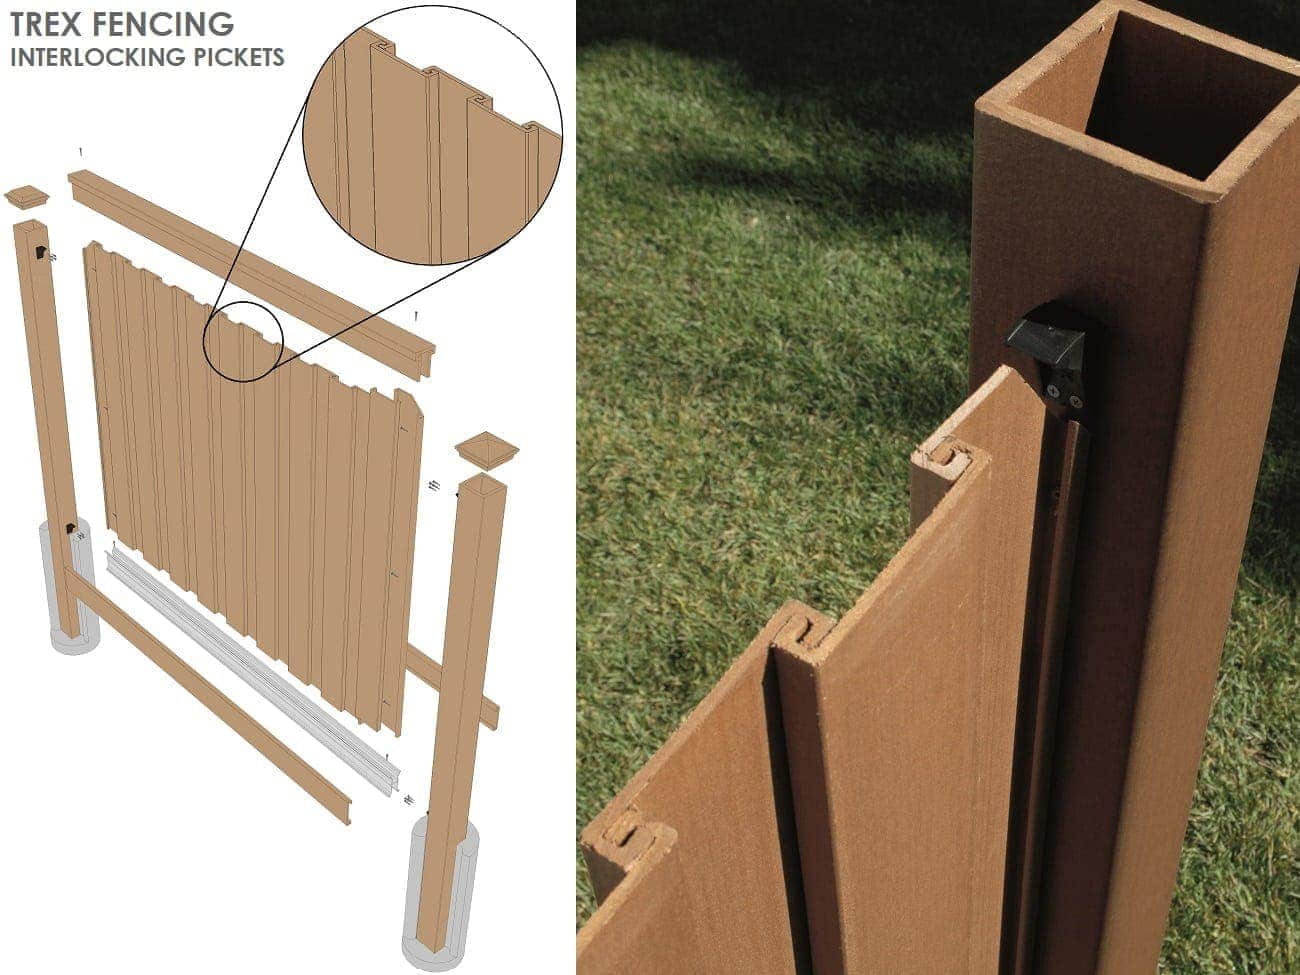 A graphic of a Trex Fence panel pulled apart to see its individual components and a side image showing pickets interlocking